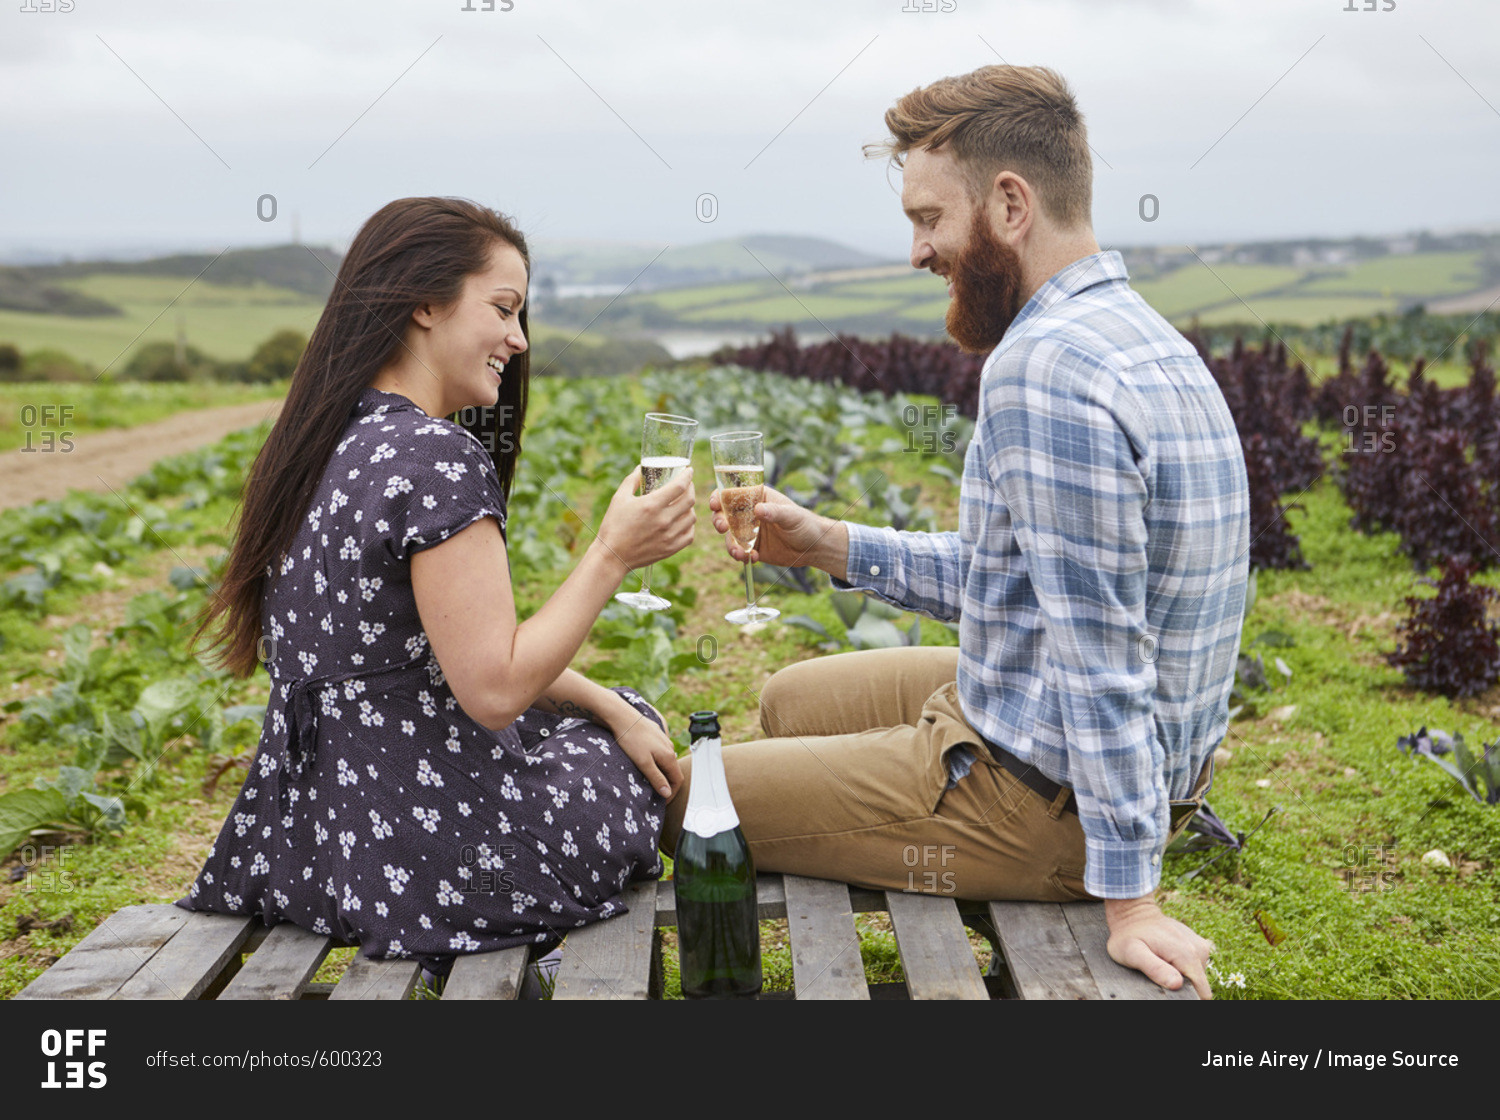 Couple in rural location sitting on pallets making a toast